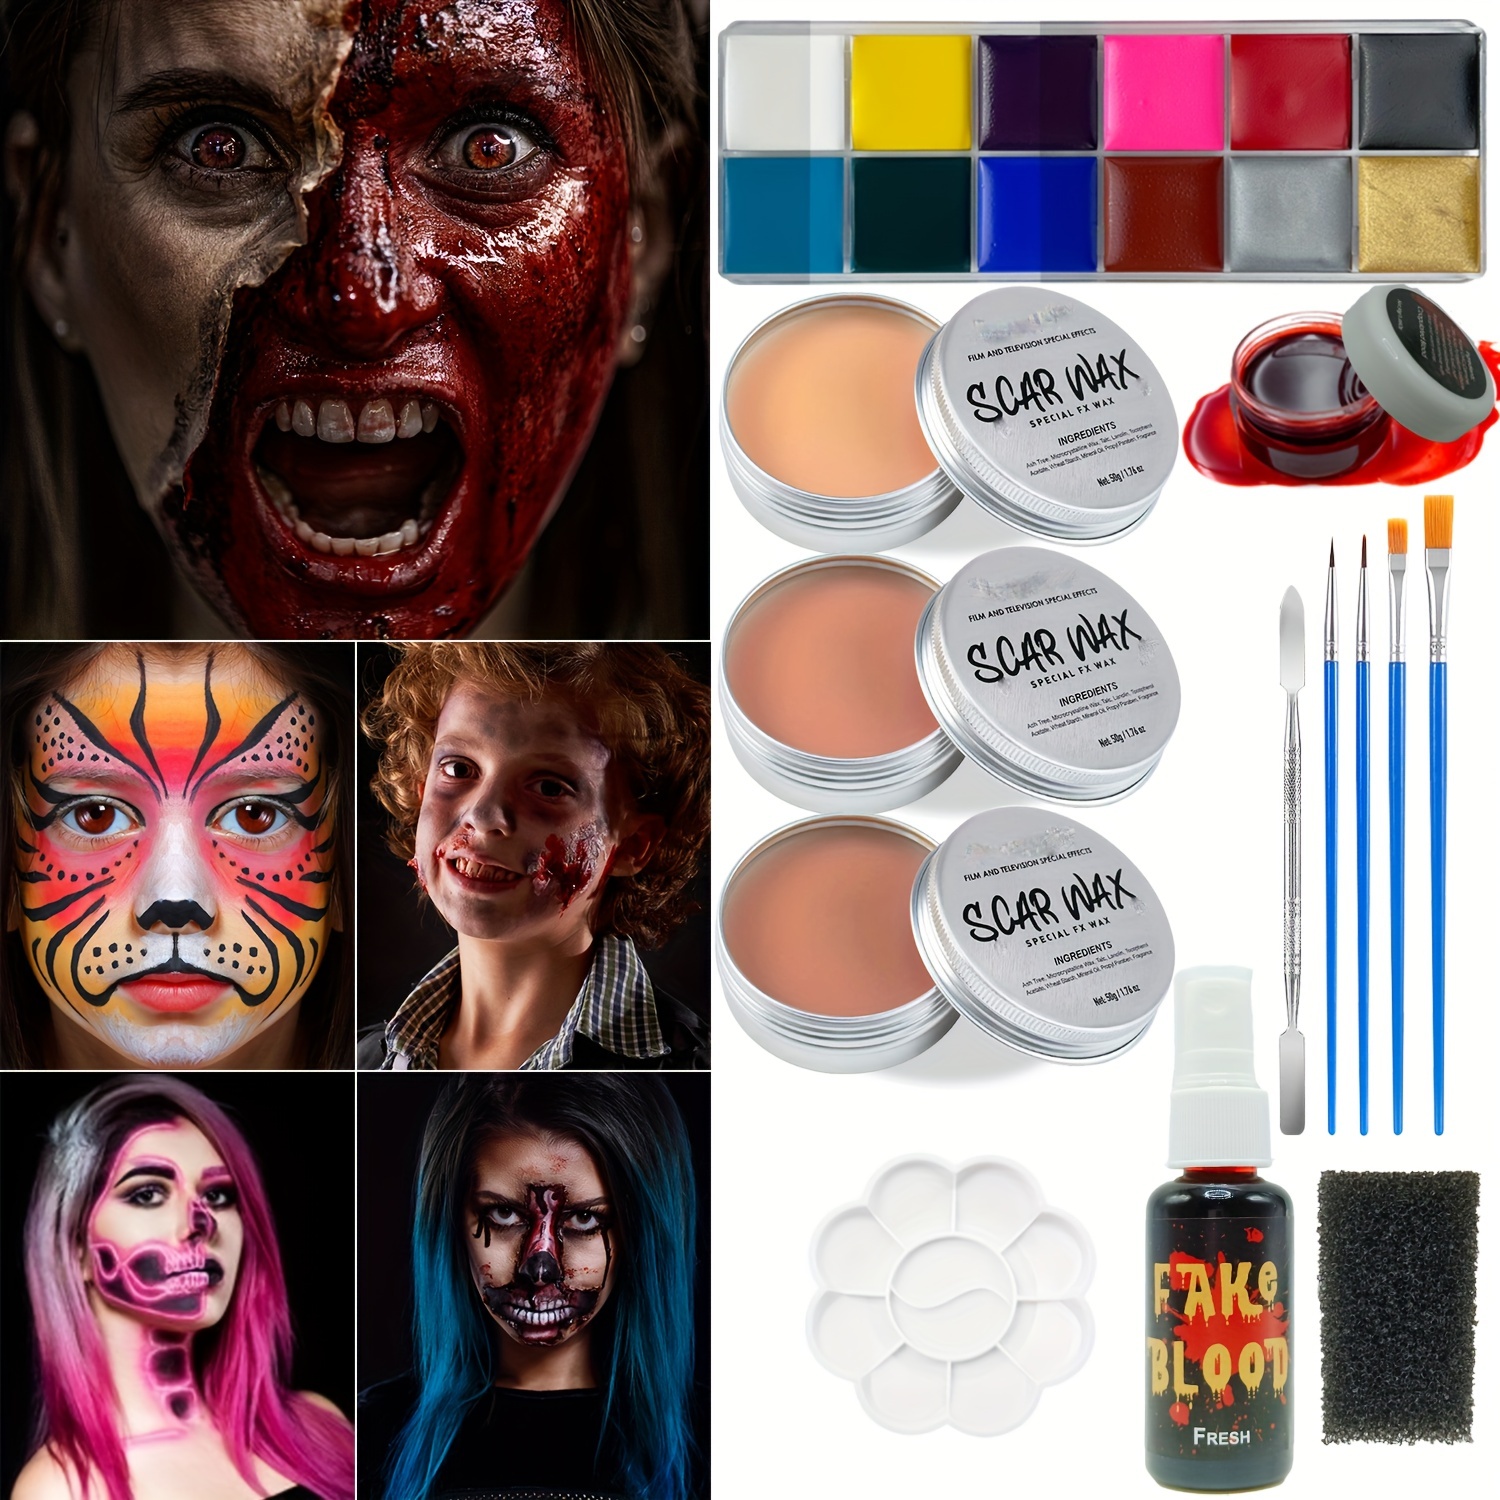 Scars Wax Special Effects Makeup Kit, Halloween Fake Blood, Face